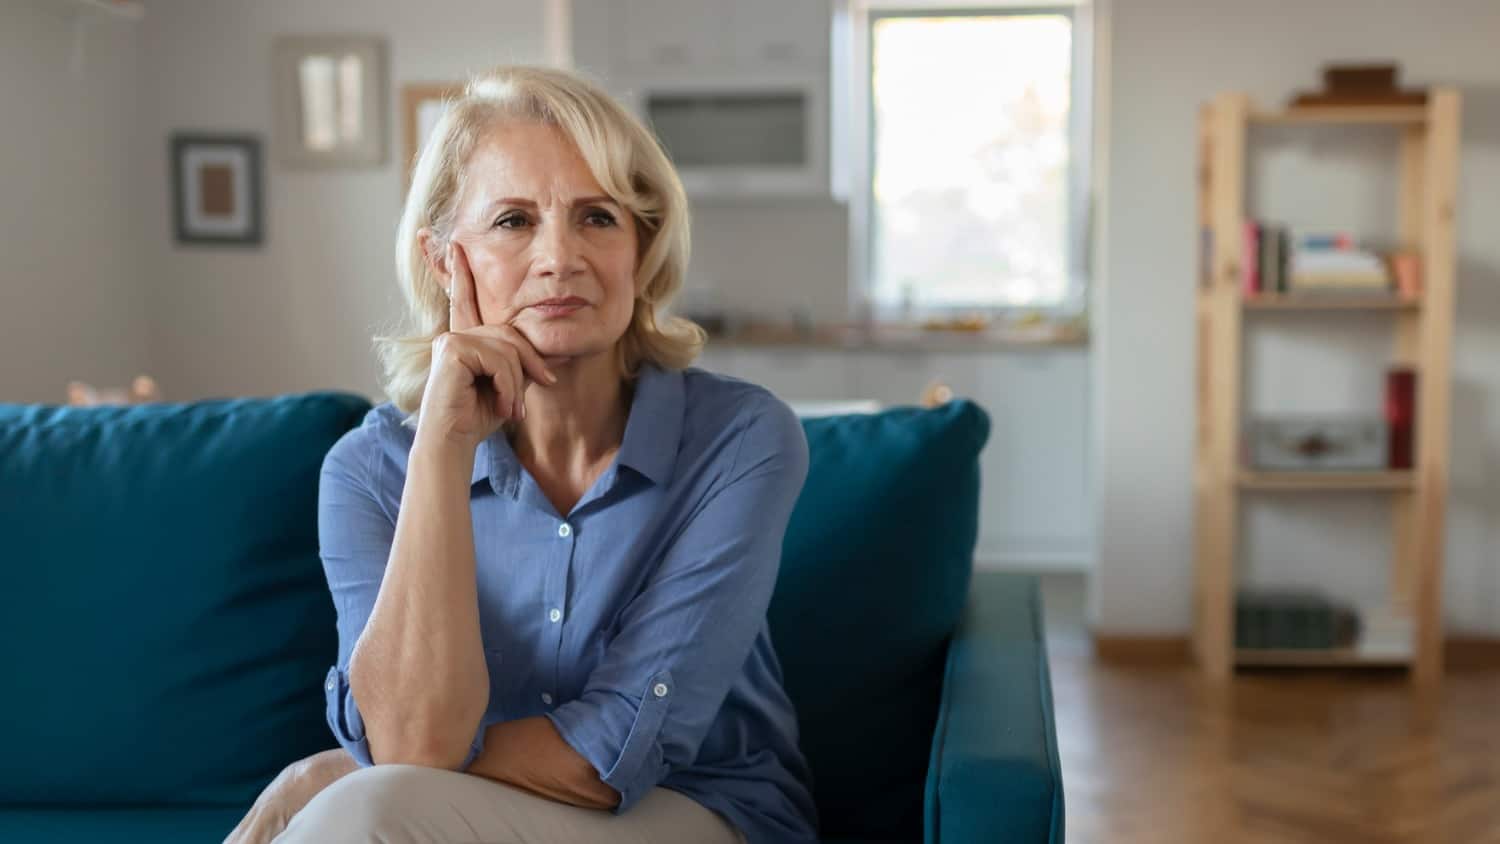 Stuck at Home 20 Things to Do if You’re Over 65 Trying to Avoid the Coronavirus (Covid-19)